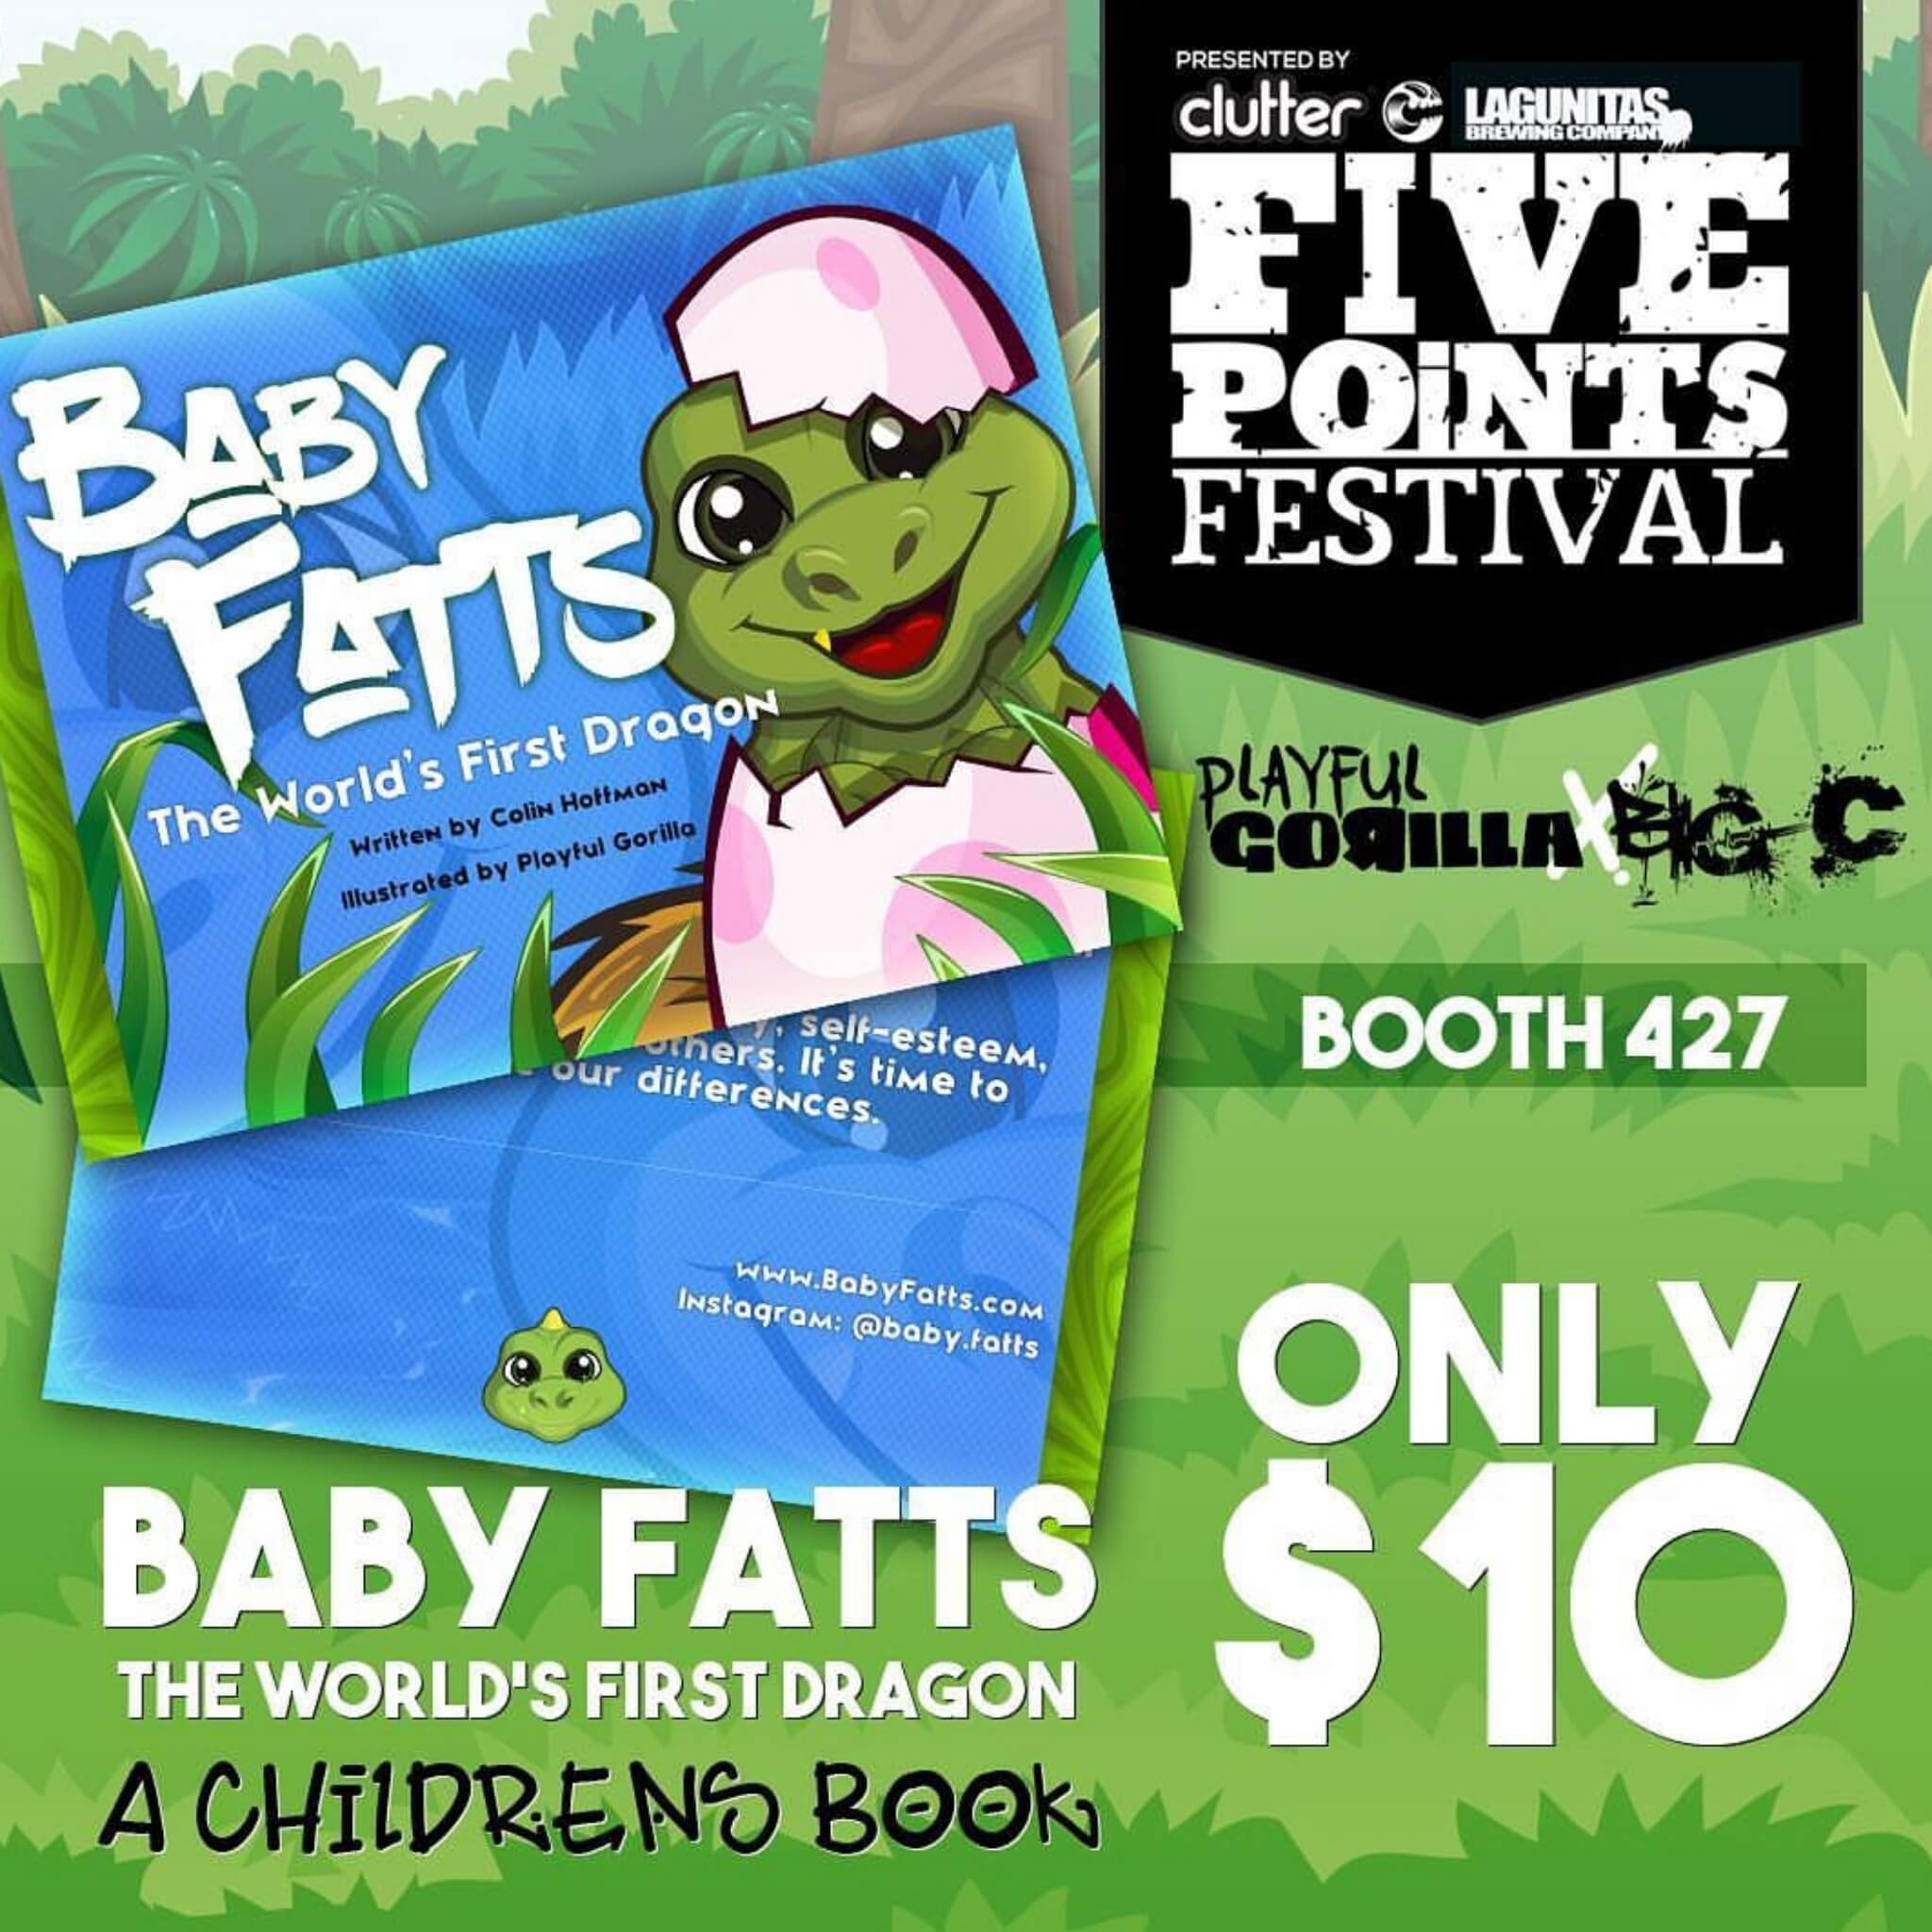 baby-fatts-the-worlds-first-dragon-book-big-c